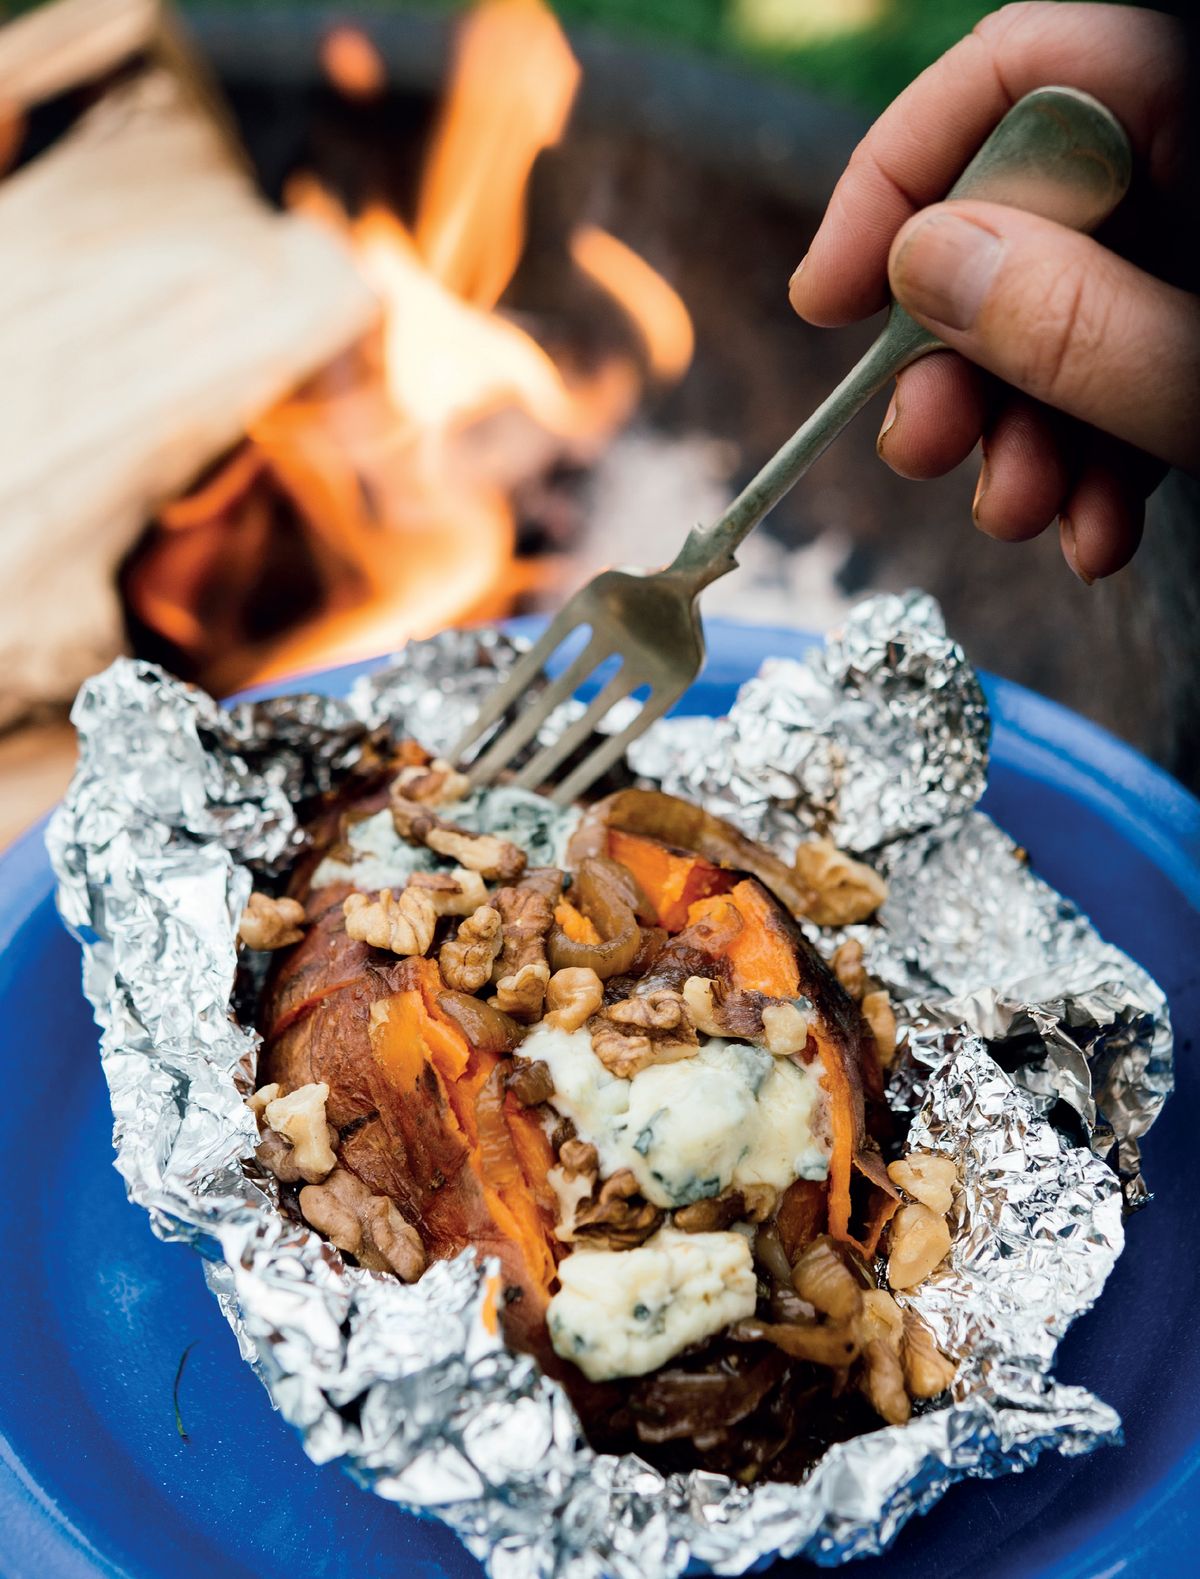 Fire-Baked Sweet Potatoes with Balsamic Onions, Blue Cheese and Walnuts